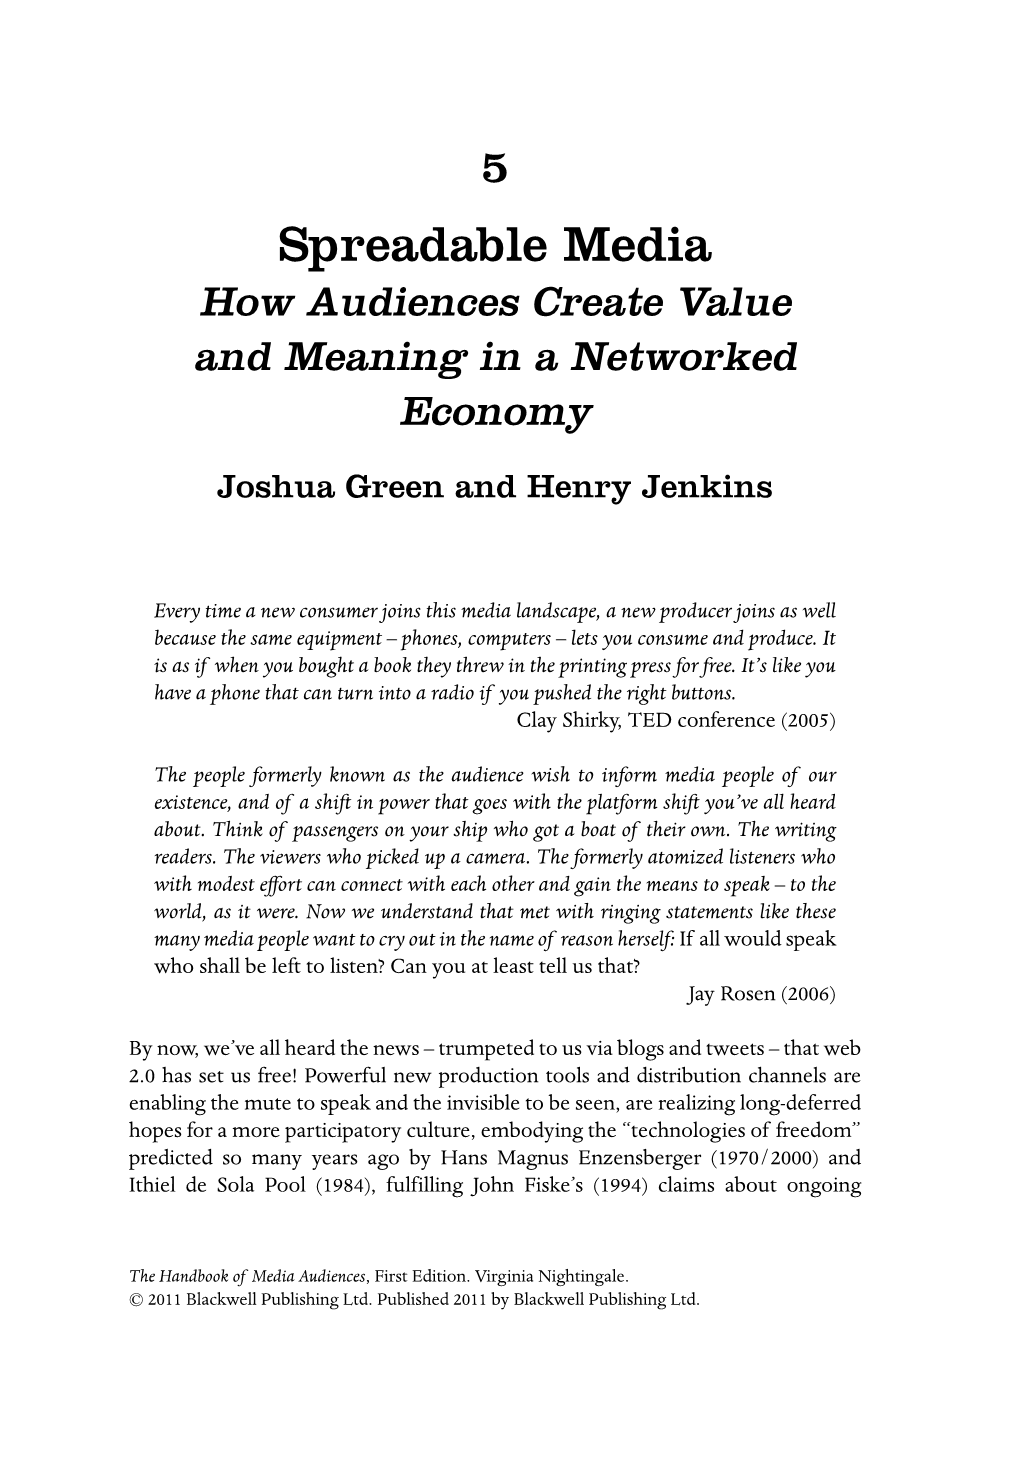 Spreadable Media How Audiences Create Value and Meaning in a Networked Economy